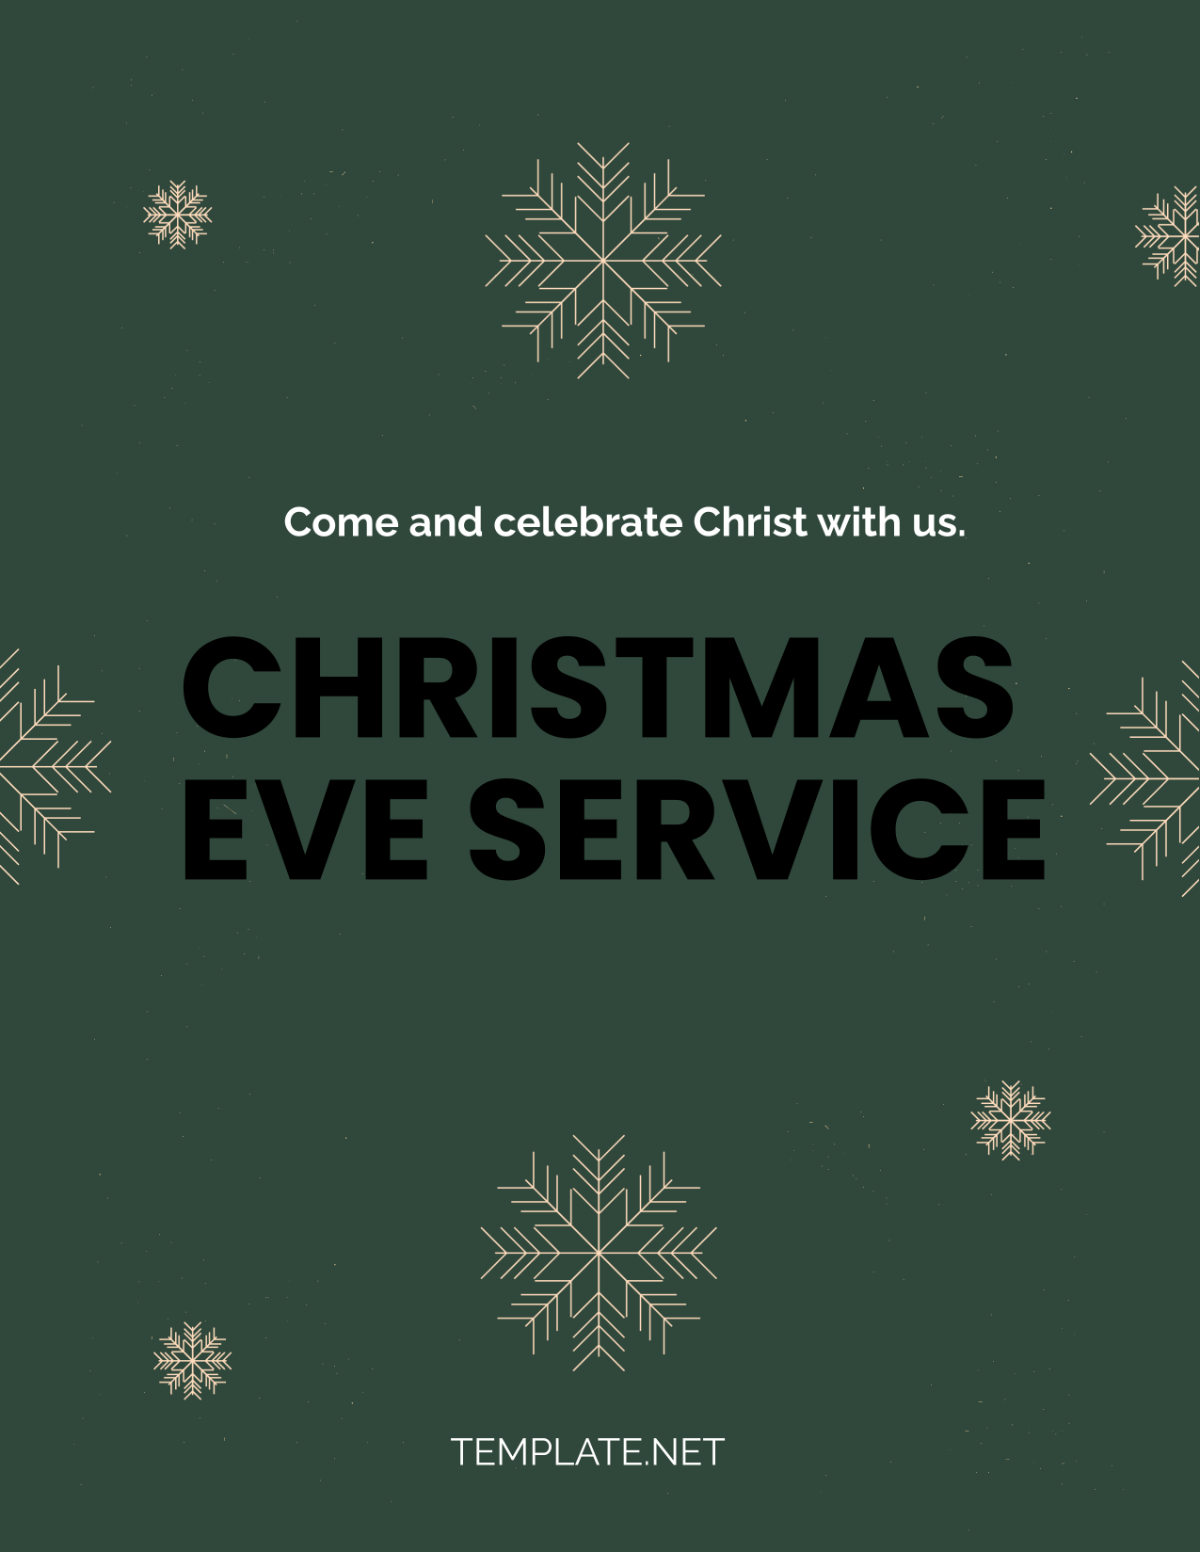 Free Christmas Eve Service Flyer Template